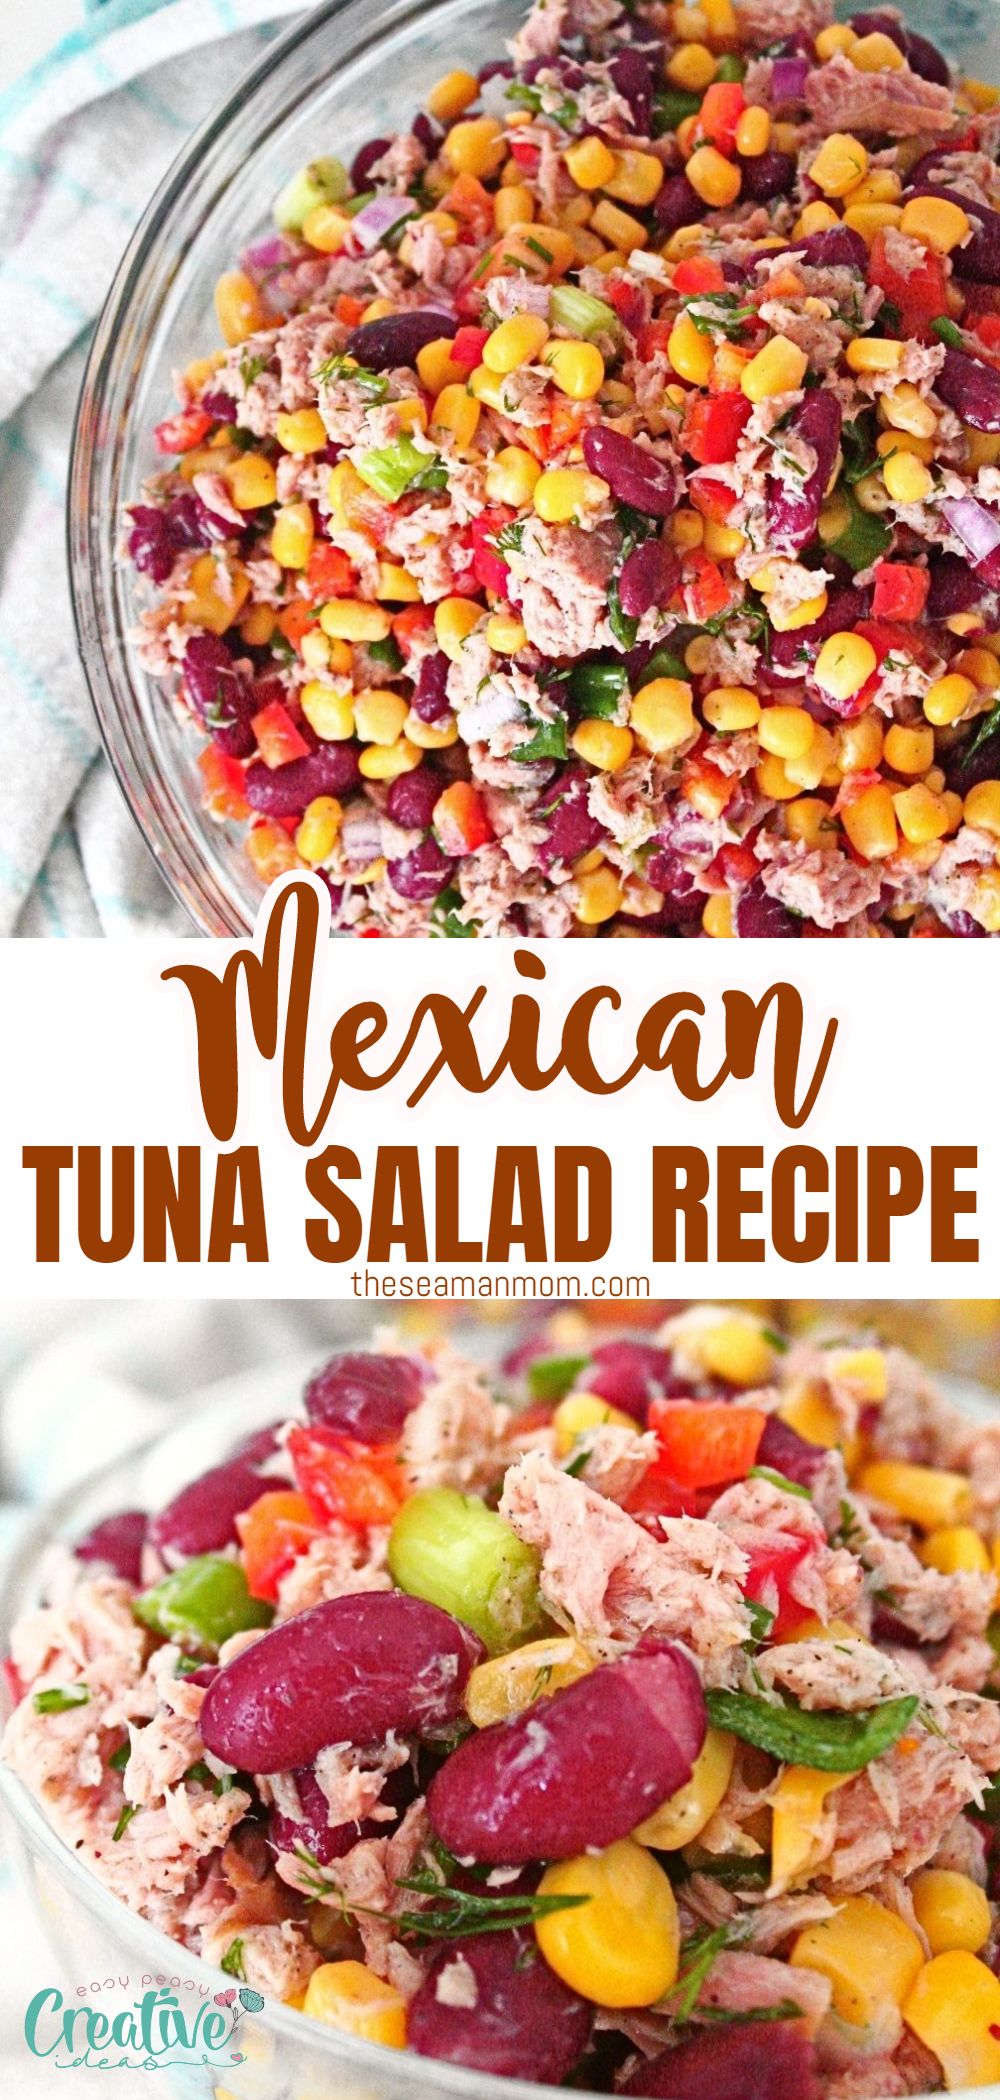 Indulge in the flavor of this tasty Mexican tuna salad for an unforgettable culinary experience! Treat yourself to a delicious tuna salad for lunch or dinner with only canned ingredients, red onion, and peppers!  via @petroneagu